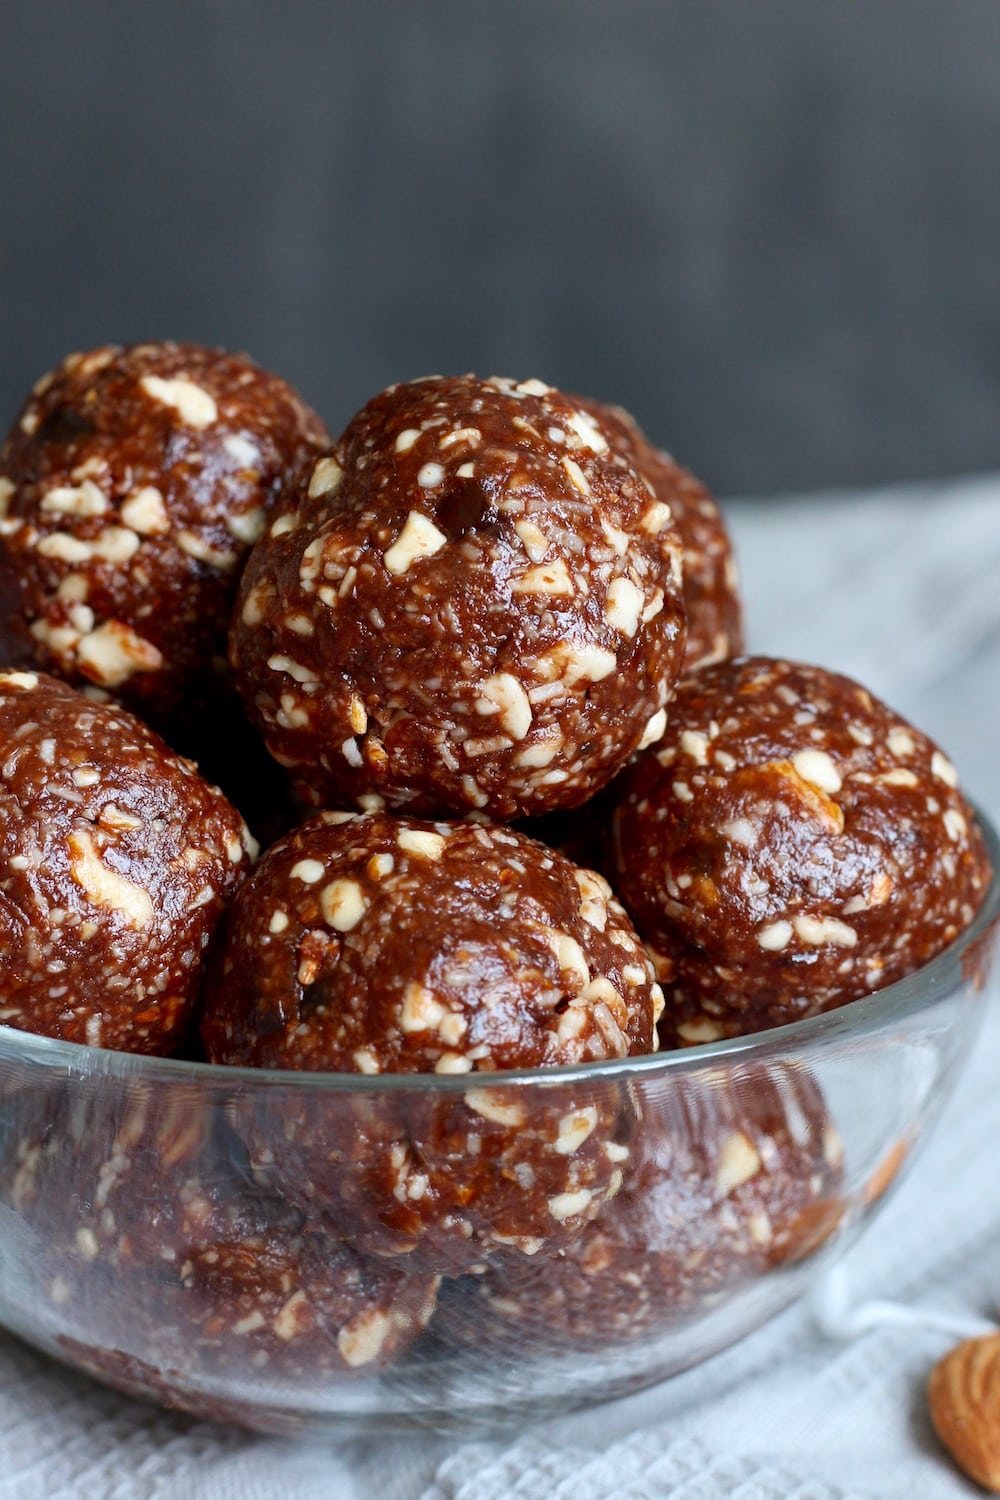 coconut and chocolate energy bites piled high in a bowl